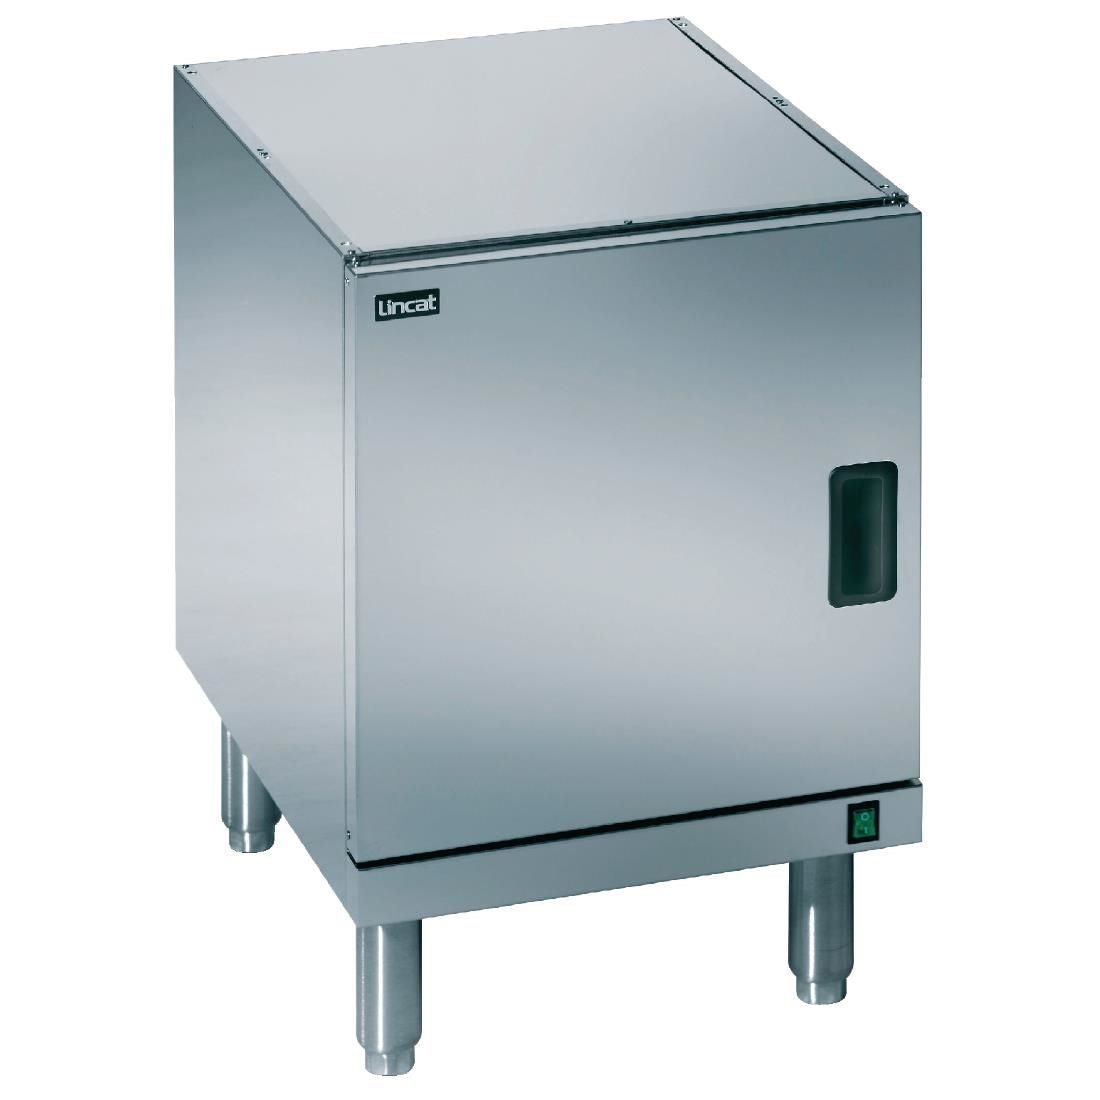 E372 Lincat Silverlink 600 Heated Pedestal With Top, Legs and Doors HCL4 JD Catering Equipment Solutions Ltd